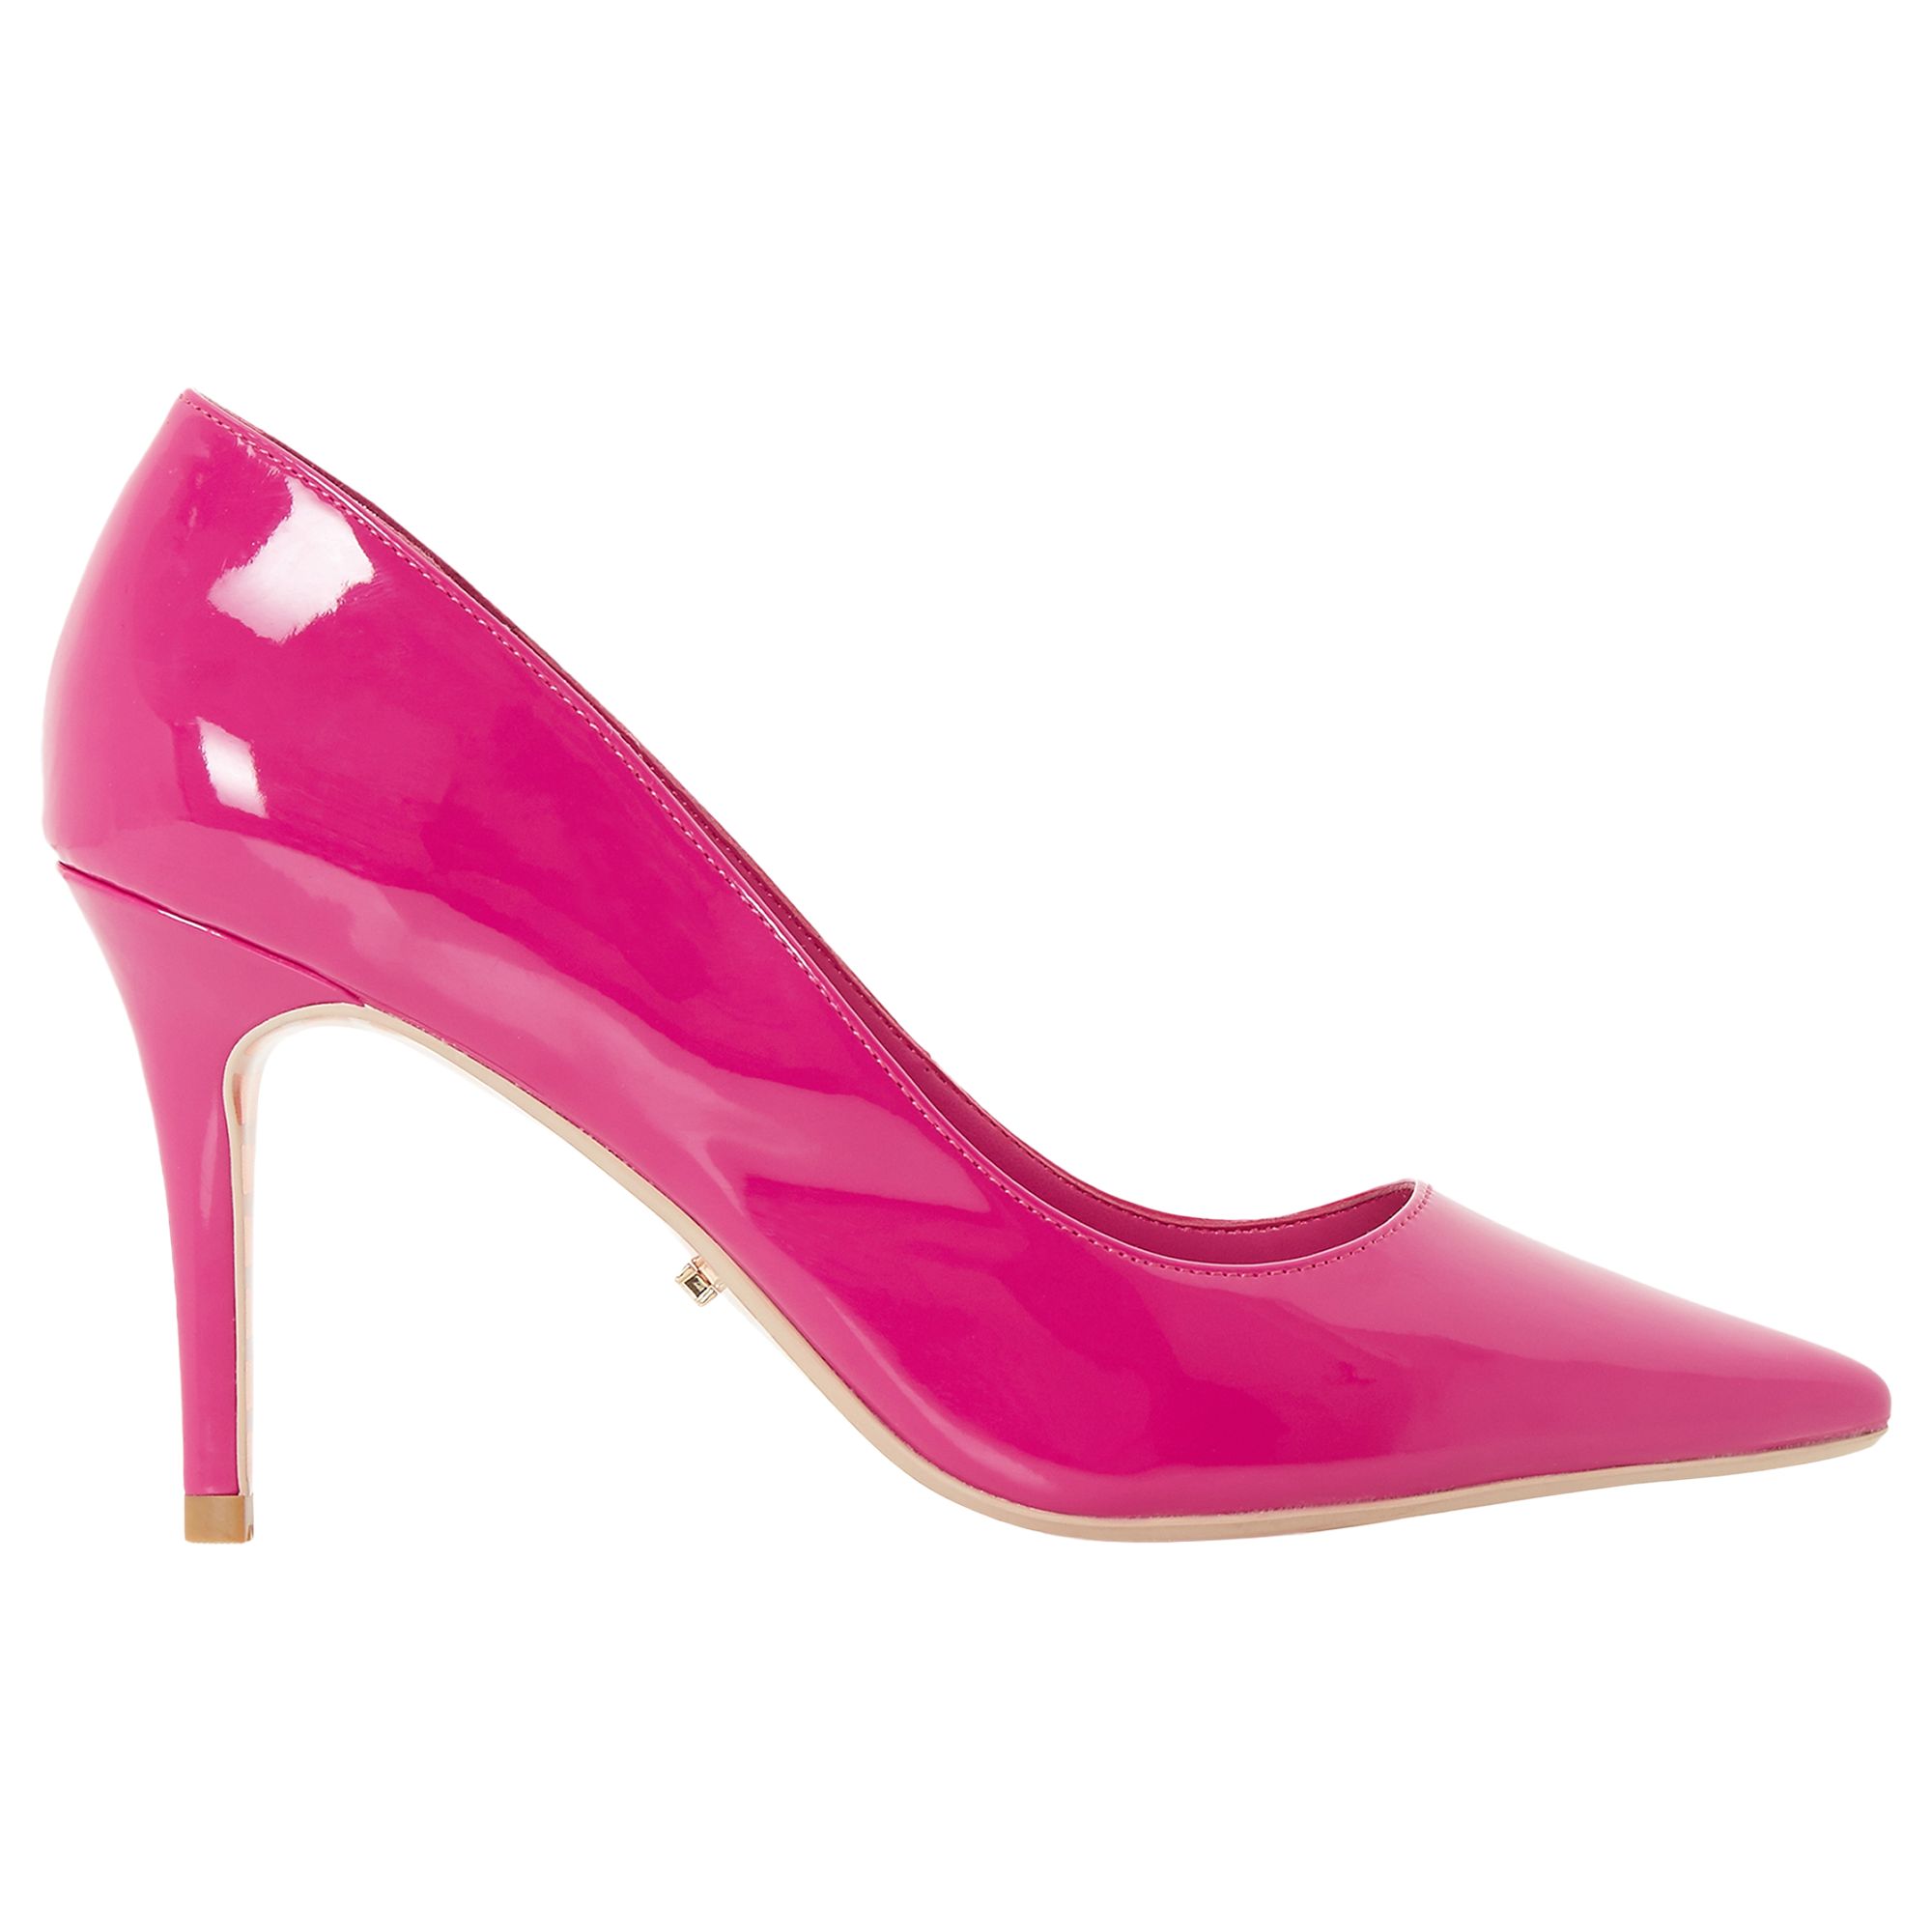 Dune Aurrora Pointed Toe Court Shoes, Pink, 5